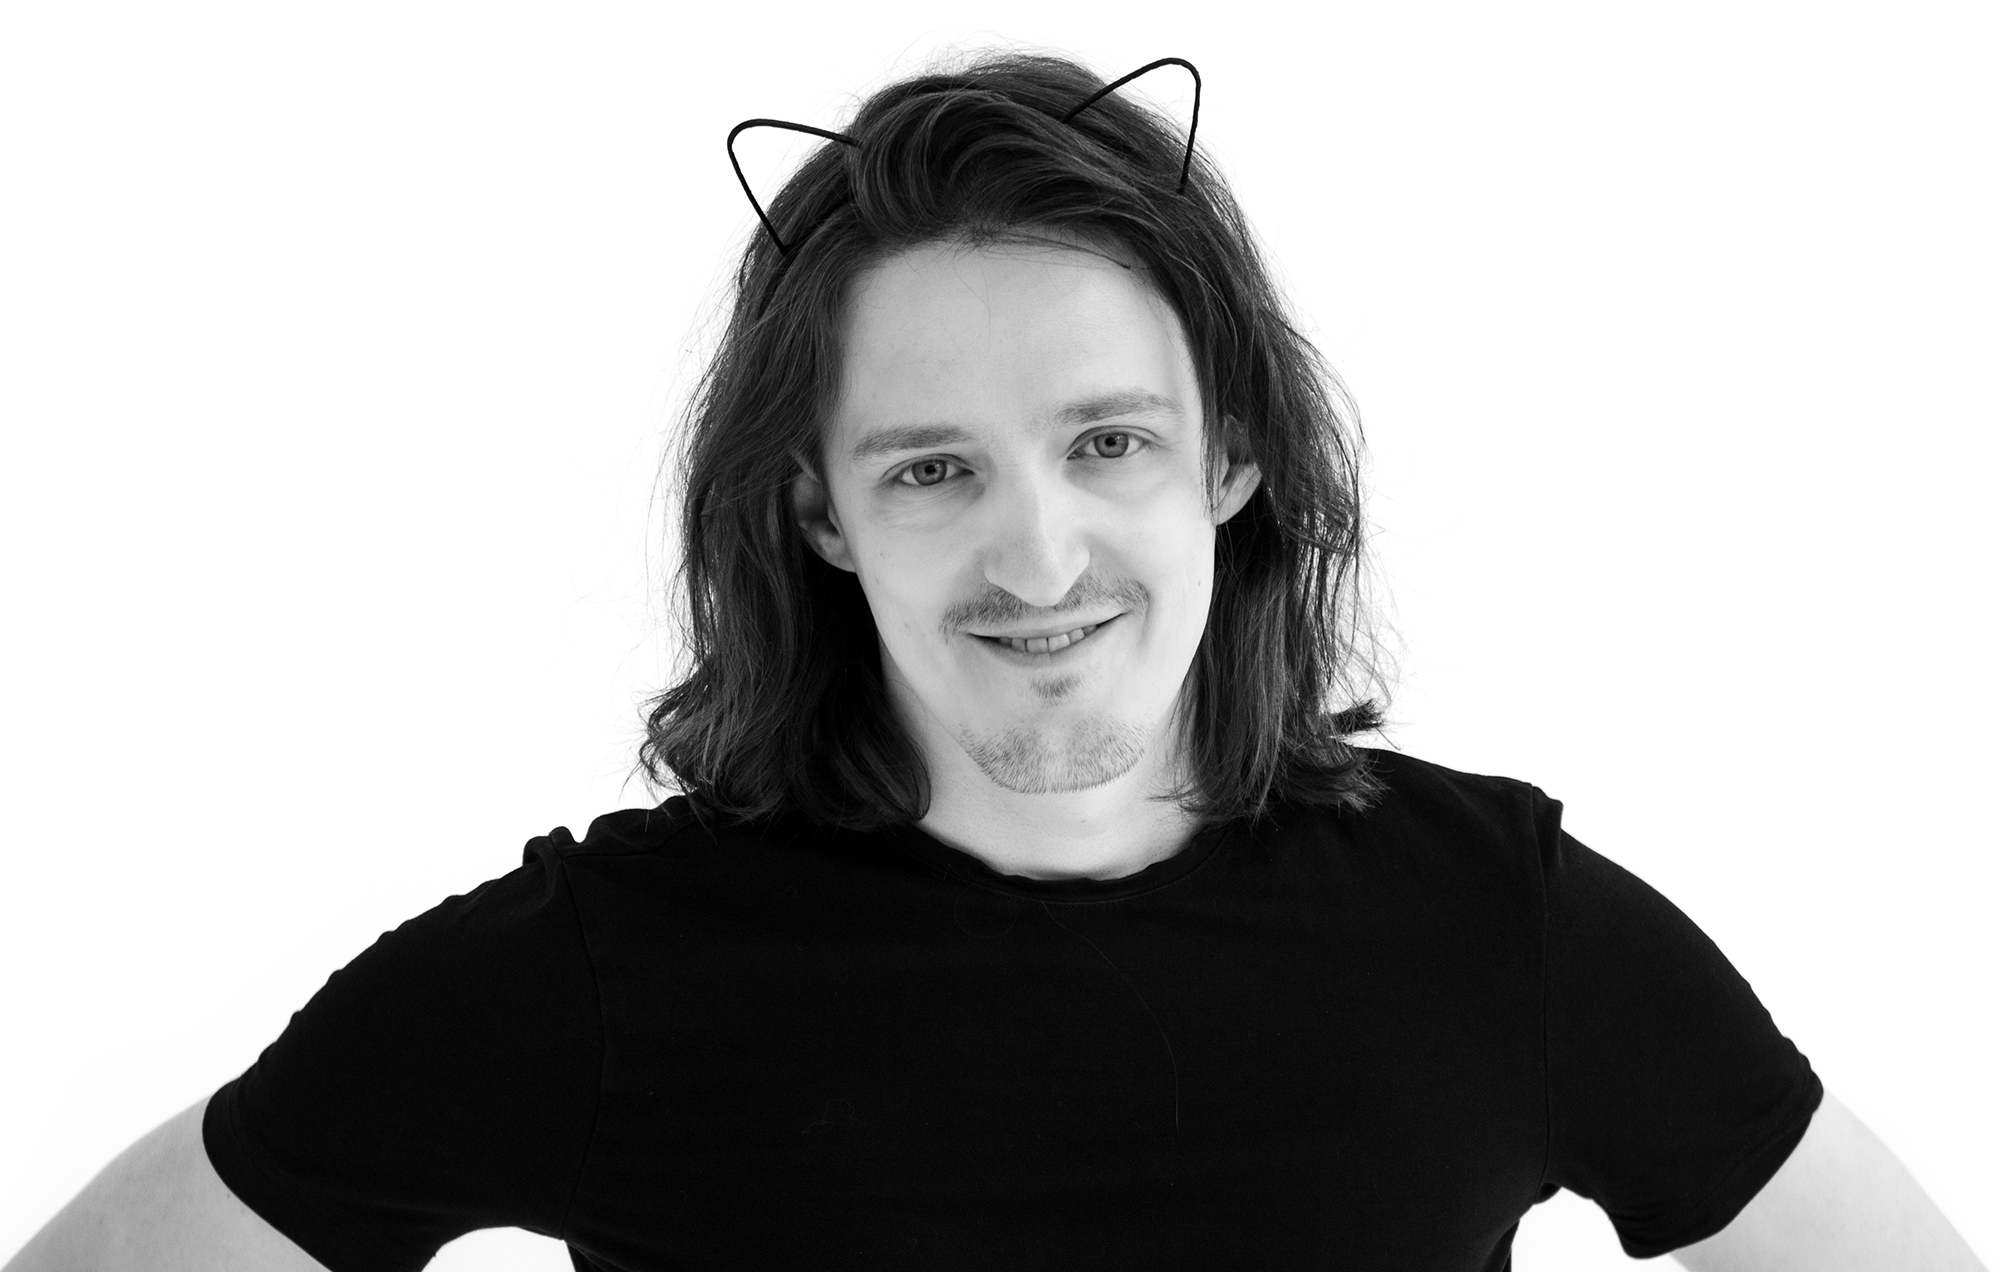 Black and white portrait of Denis Sokolov smiling and wearing cat ears.